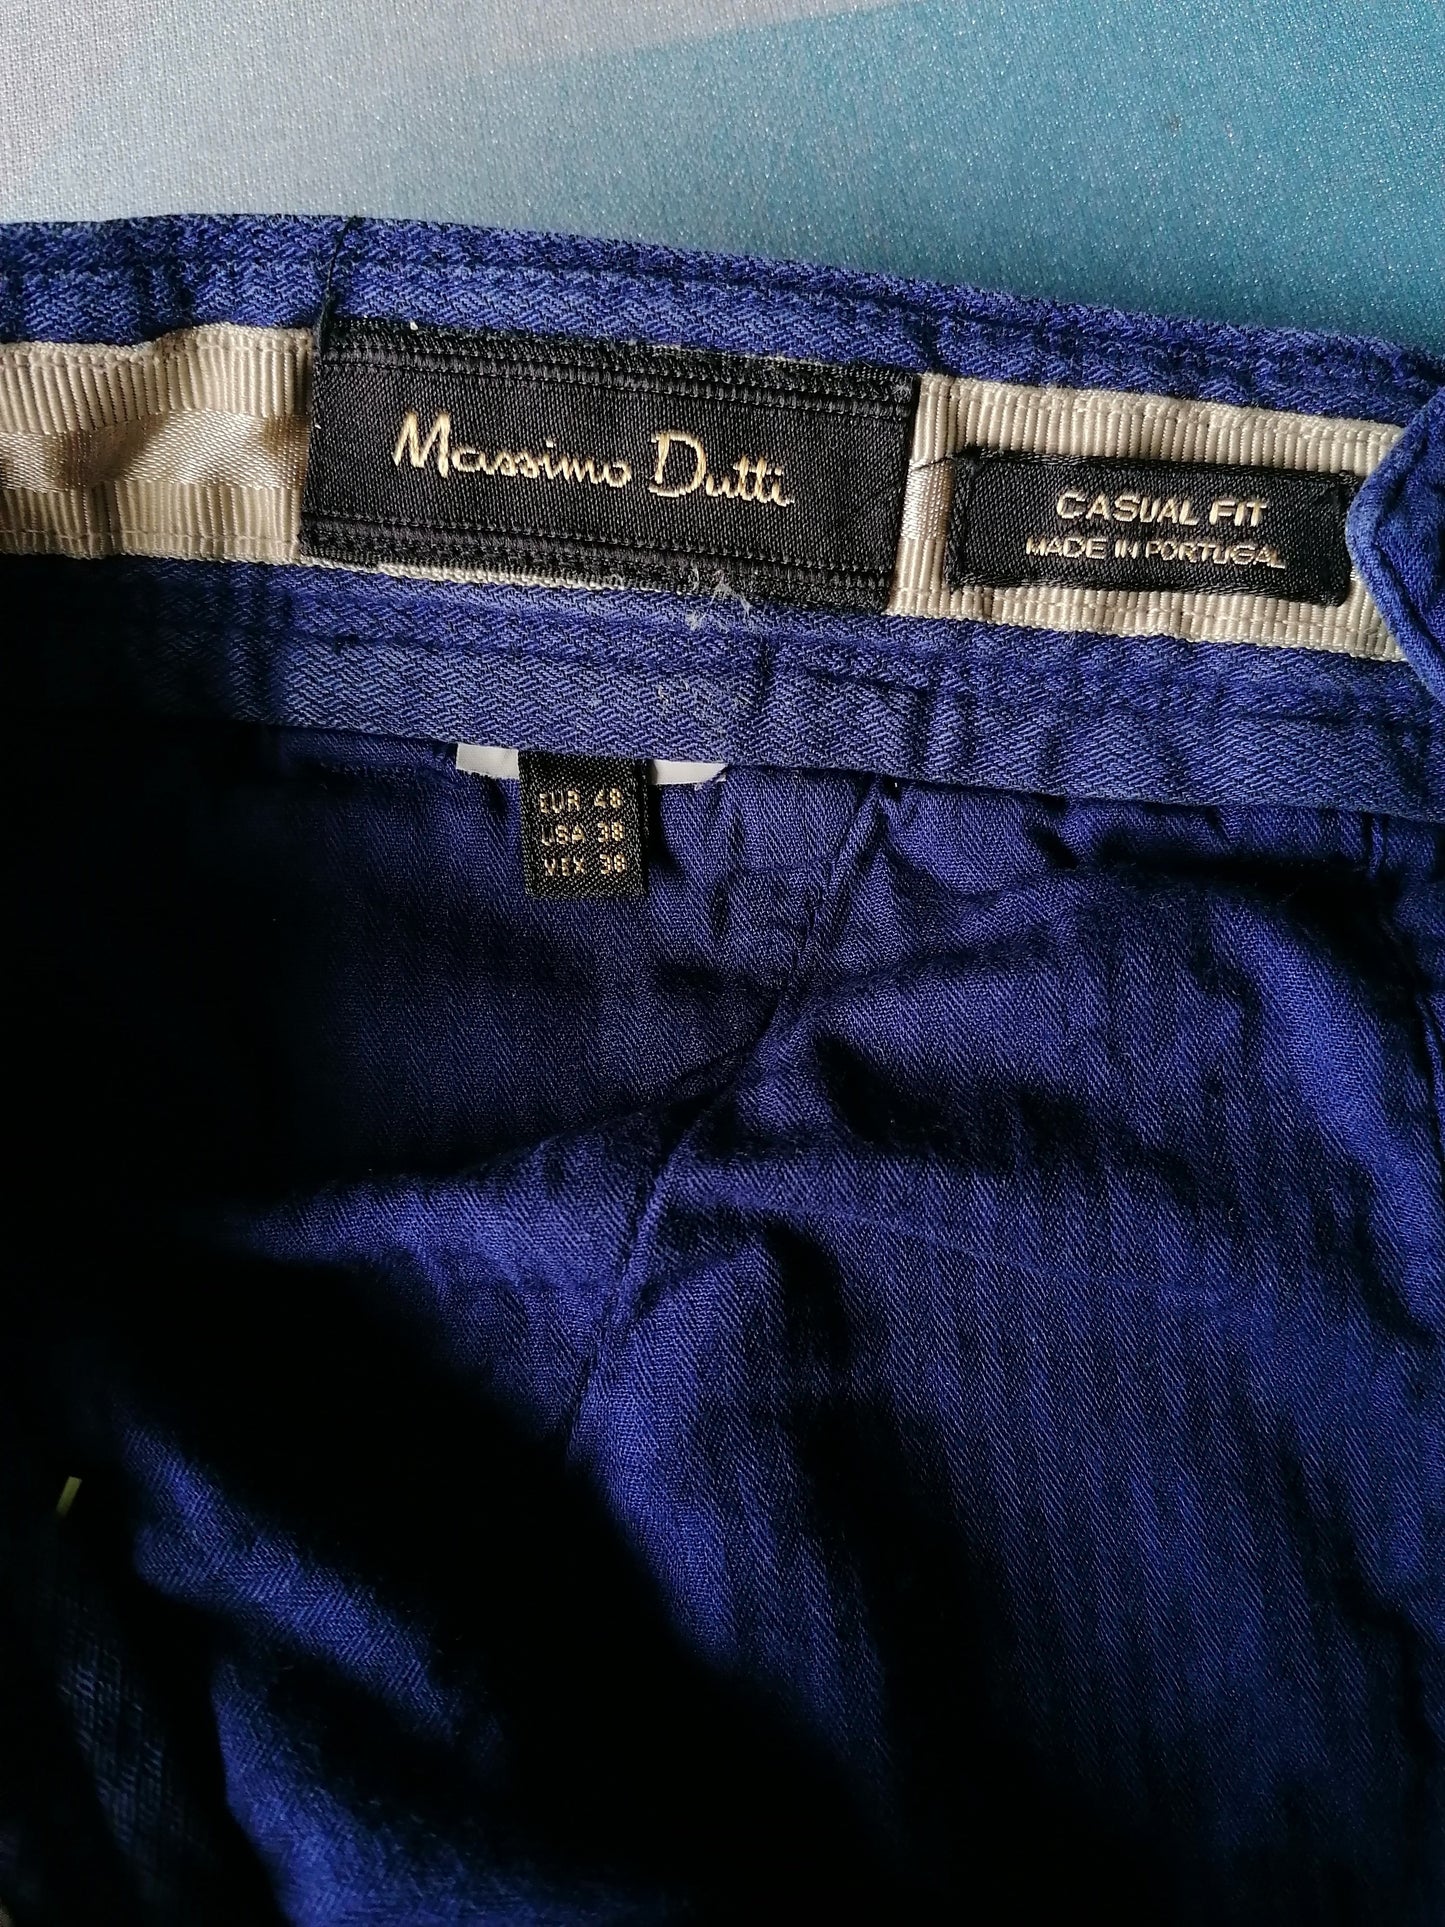 Massimo Dutti pants. Blaur colored. Size 48. Casual fit.